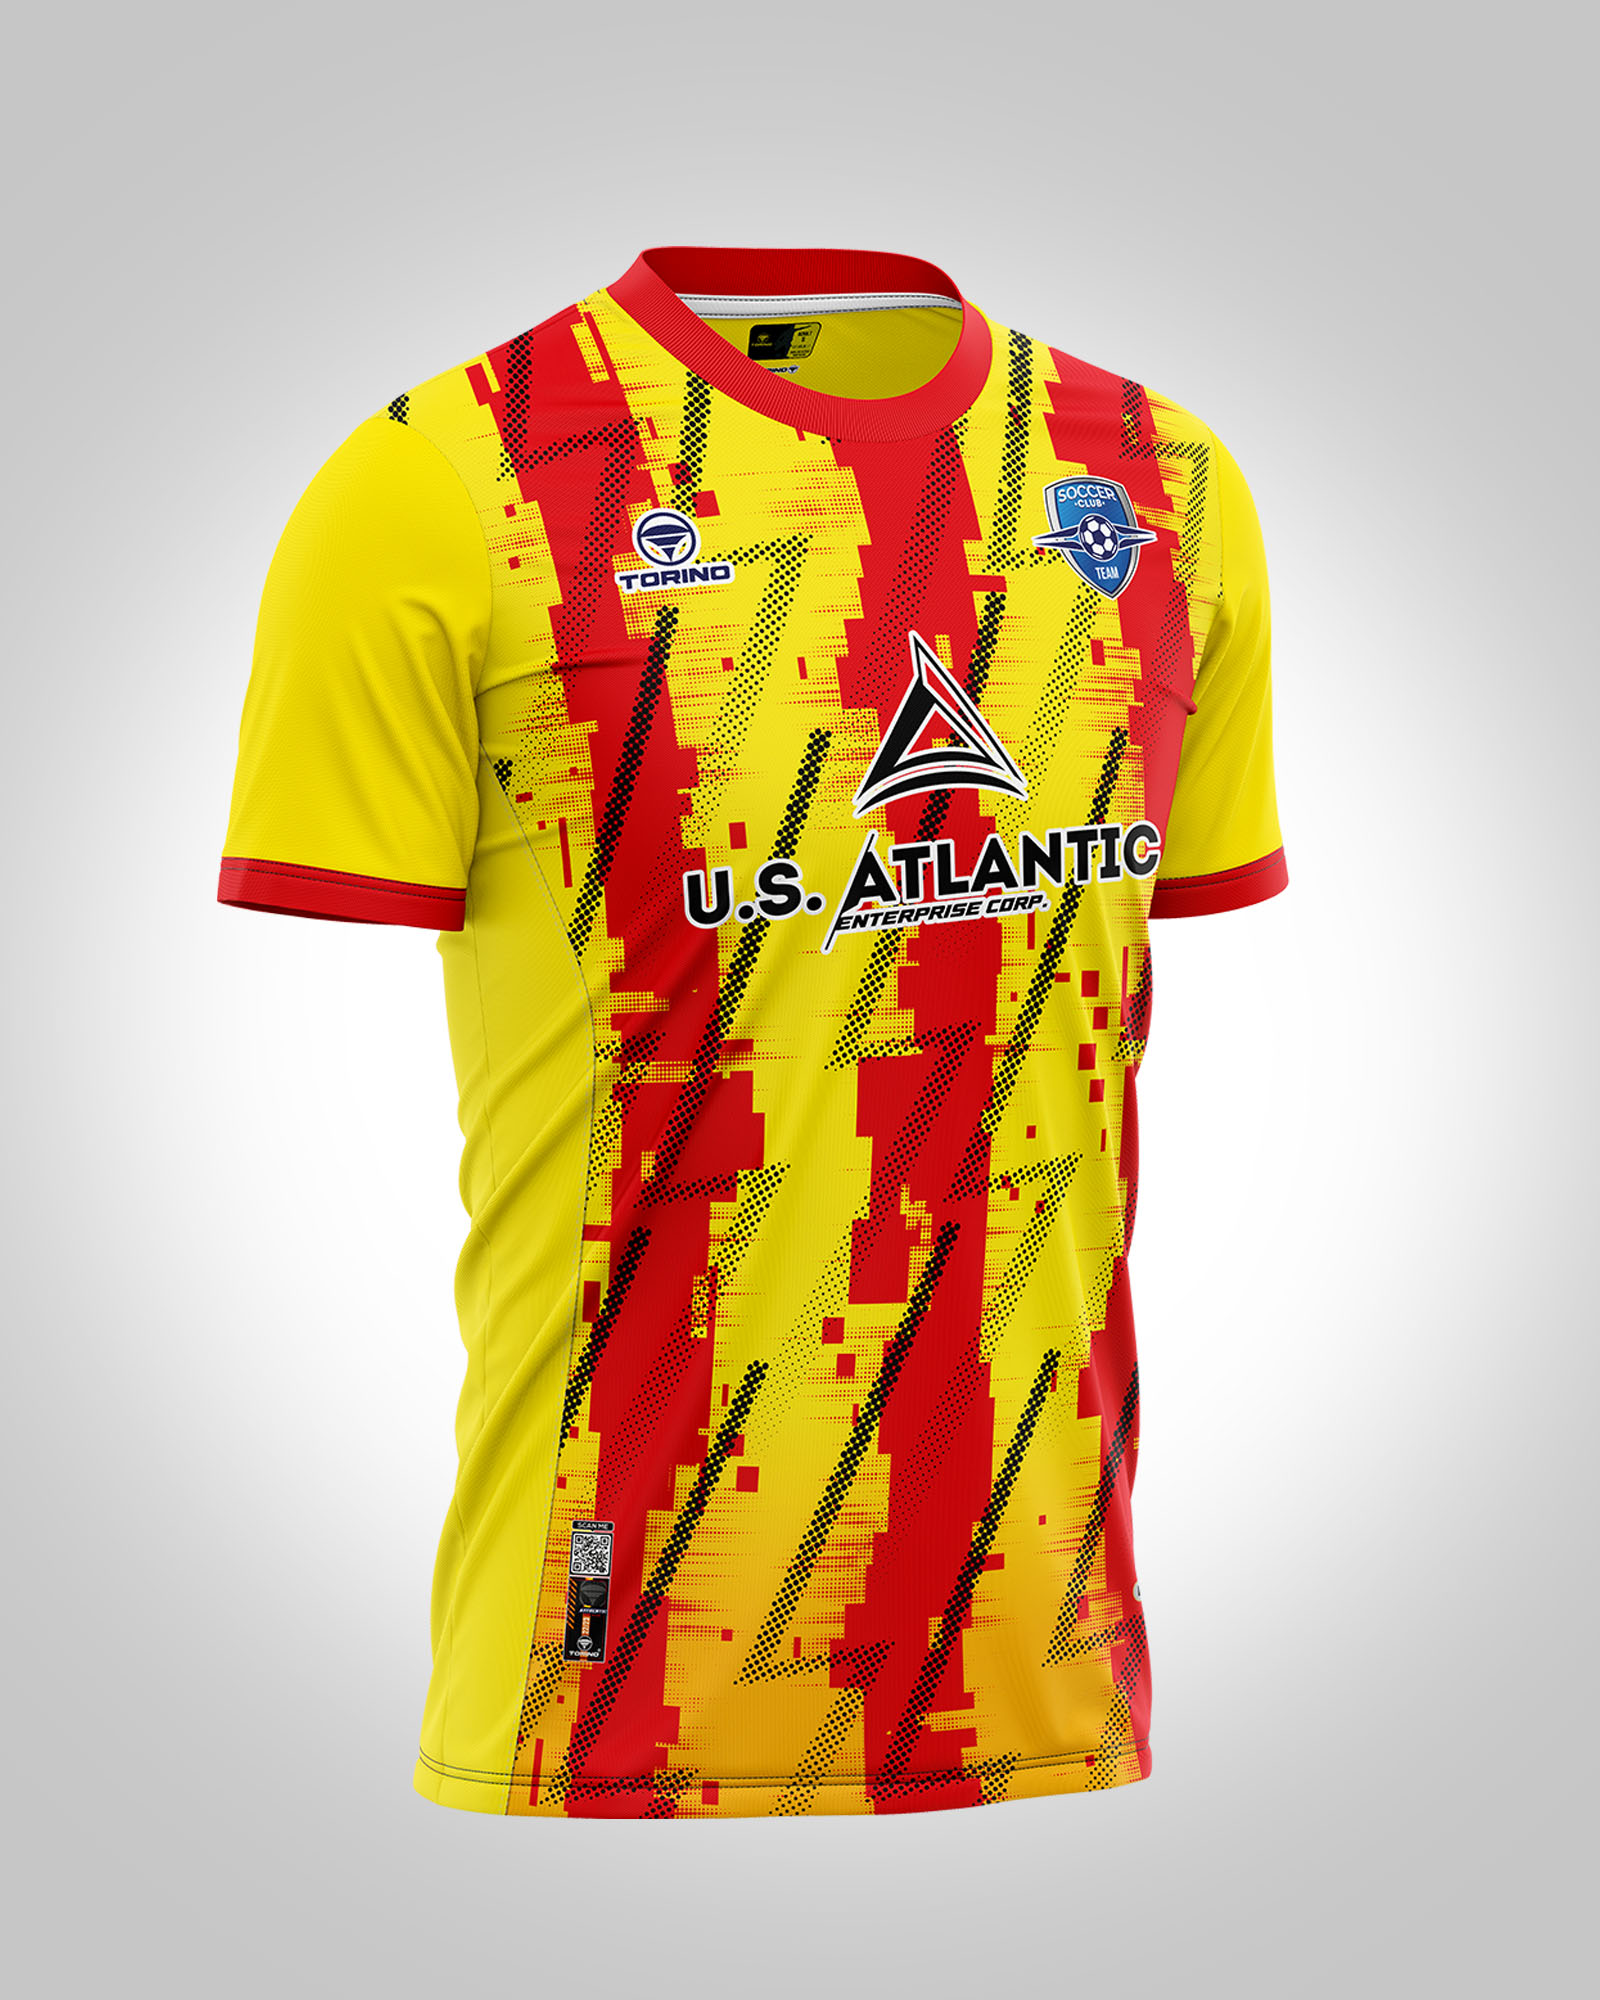 jersey_competition20a